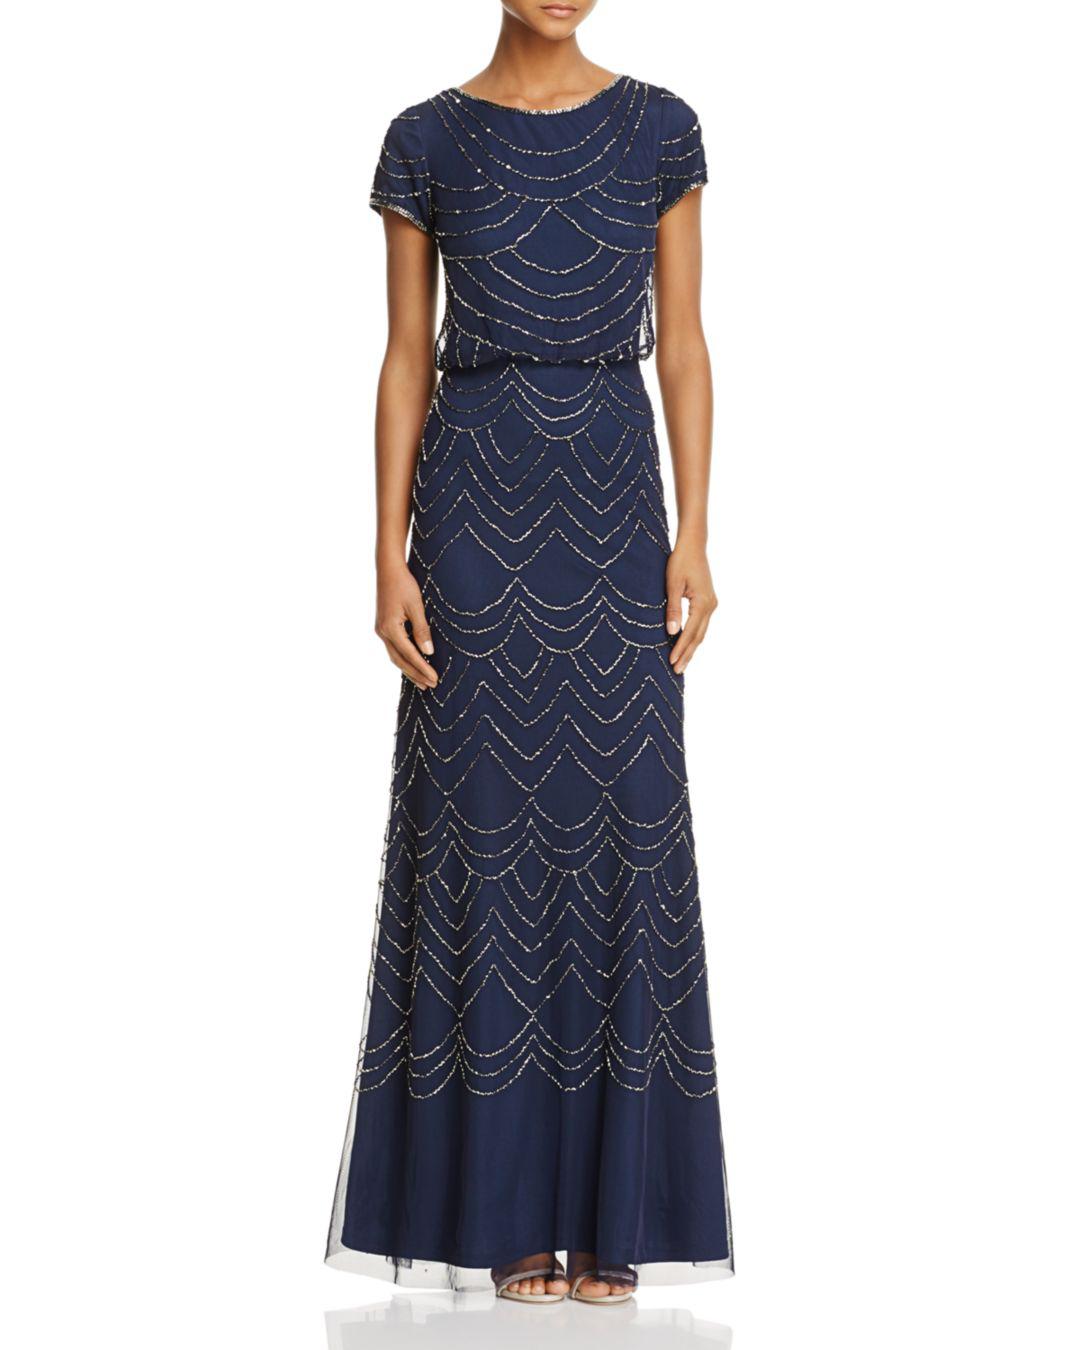 Lyst - Adrianna Papell Beaded Blouson Gown in Blue